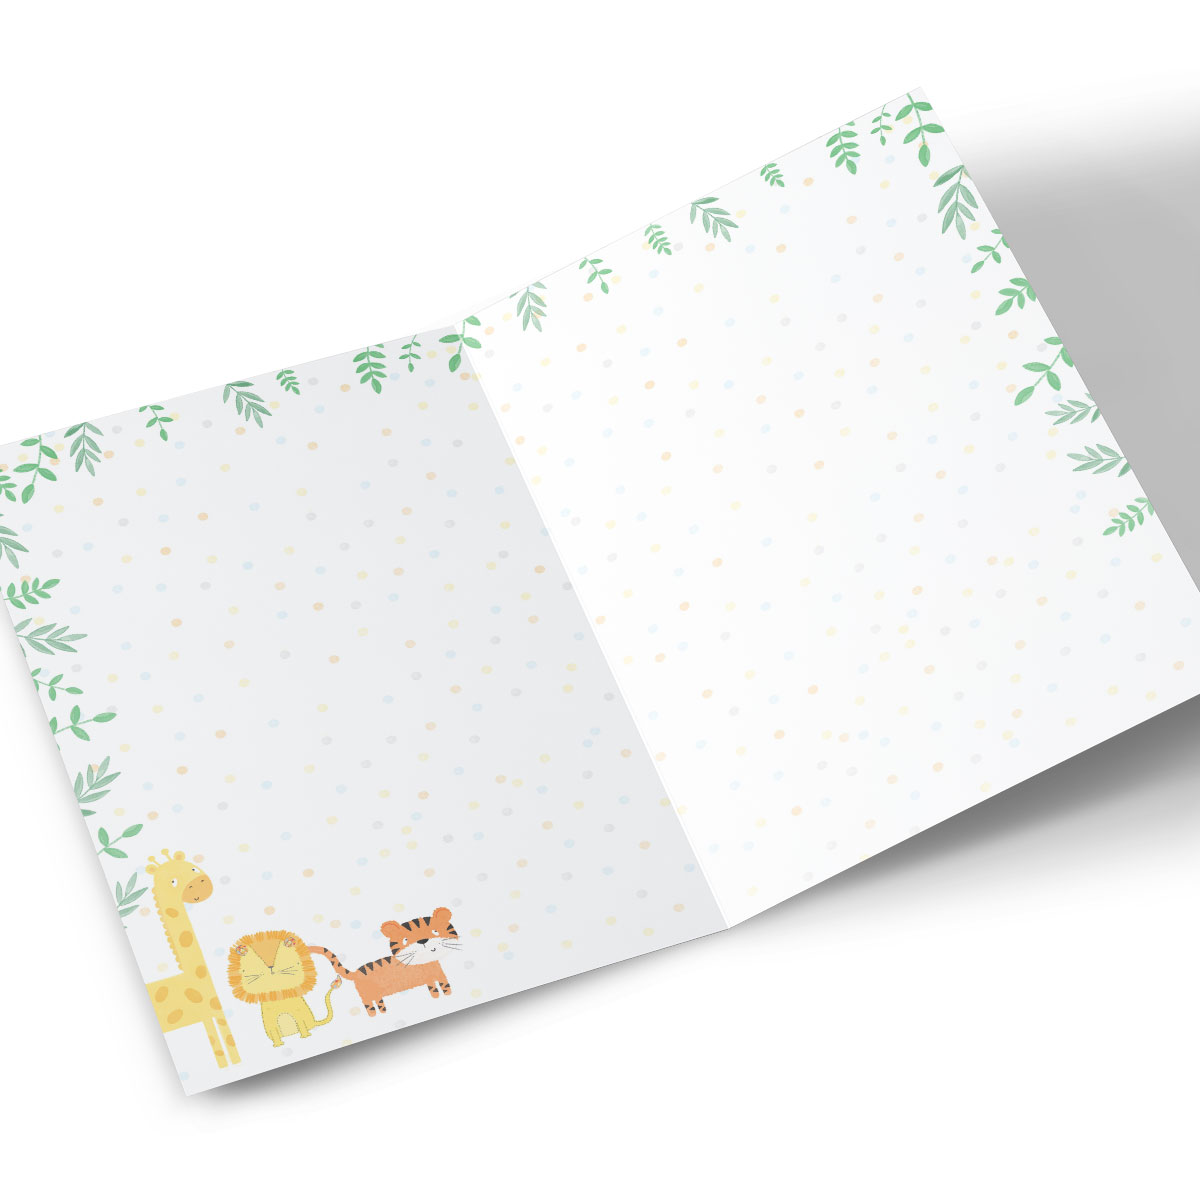 Photo New Baby Card - Jungle Animals Thank You